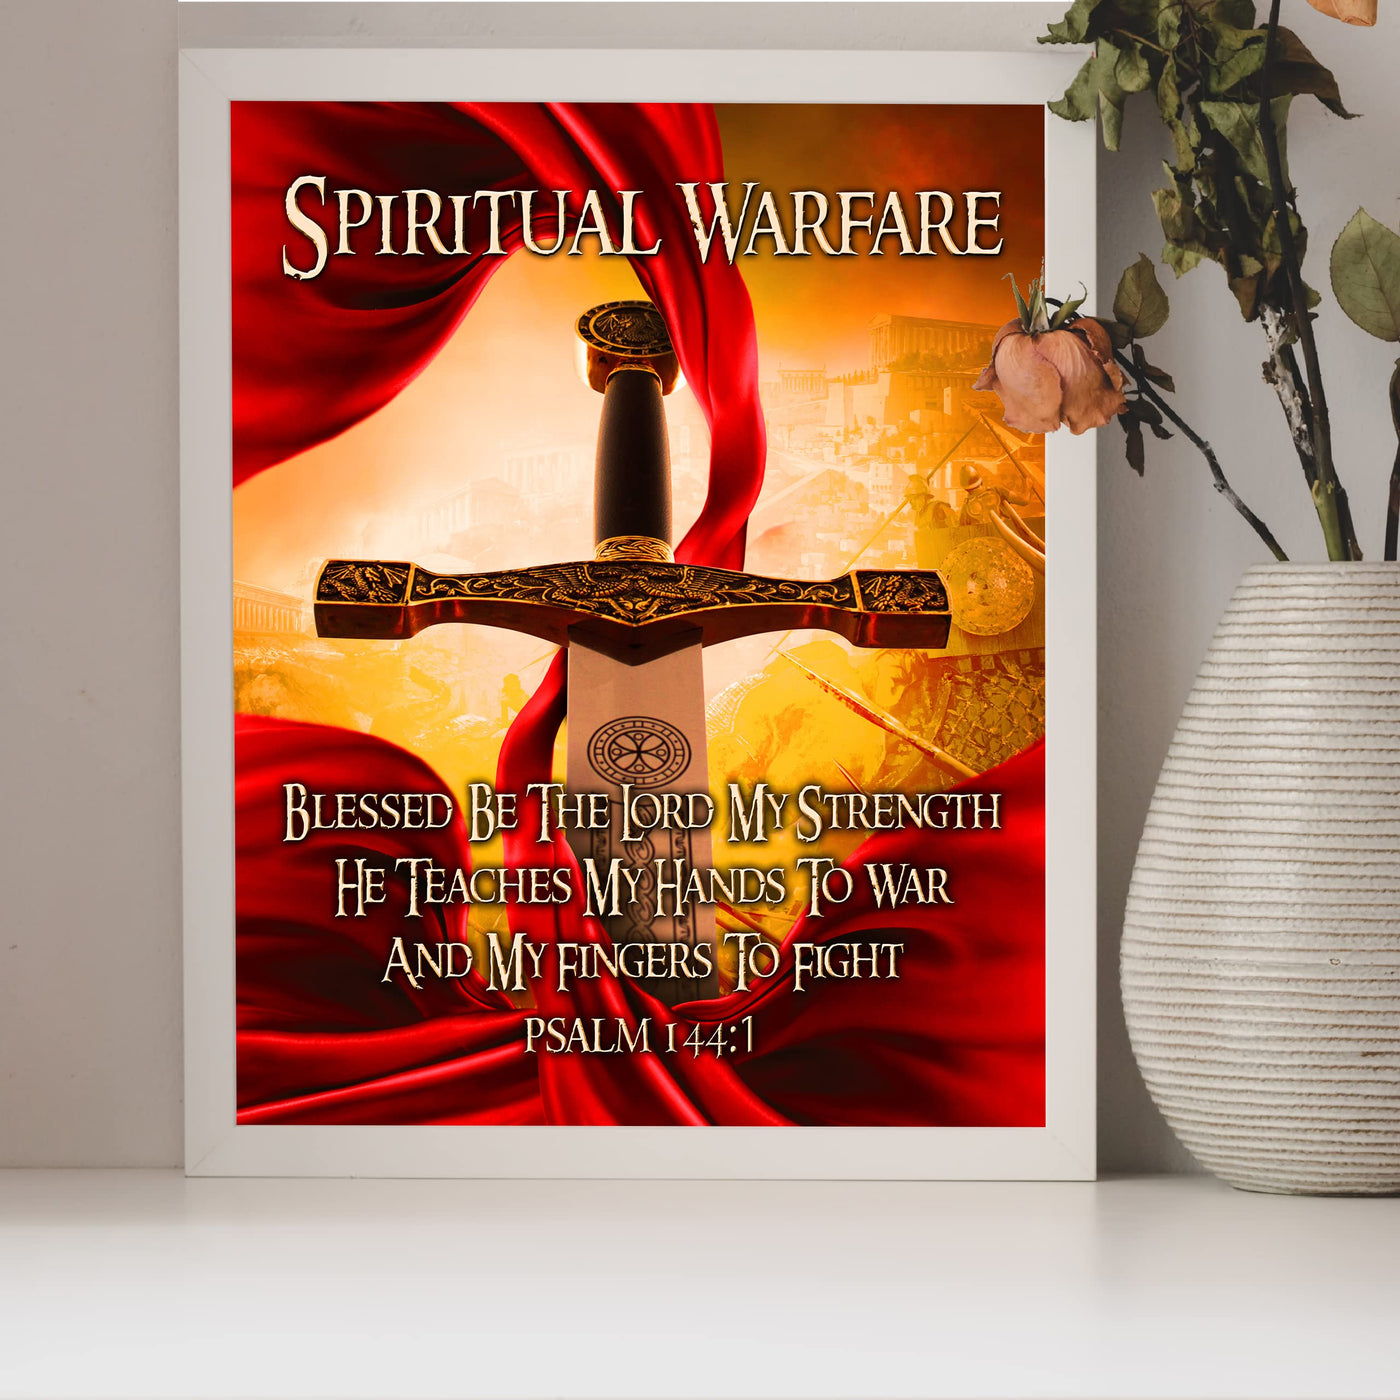 Spiritual Warfare-Blessed Be the Lord Bible Verse Wall Art -8x10" Motivational Christian Sword Picture Print-Ready to Frame. Home-Office-Sunday School-Church Decor. Great Gift of Faith! Psalm 144:1